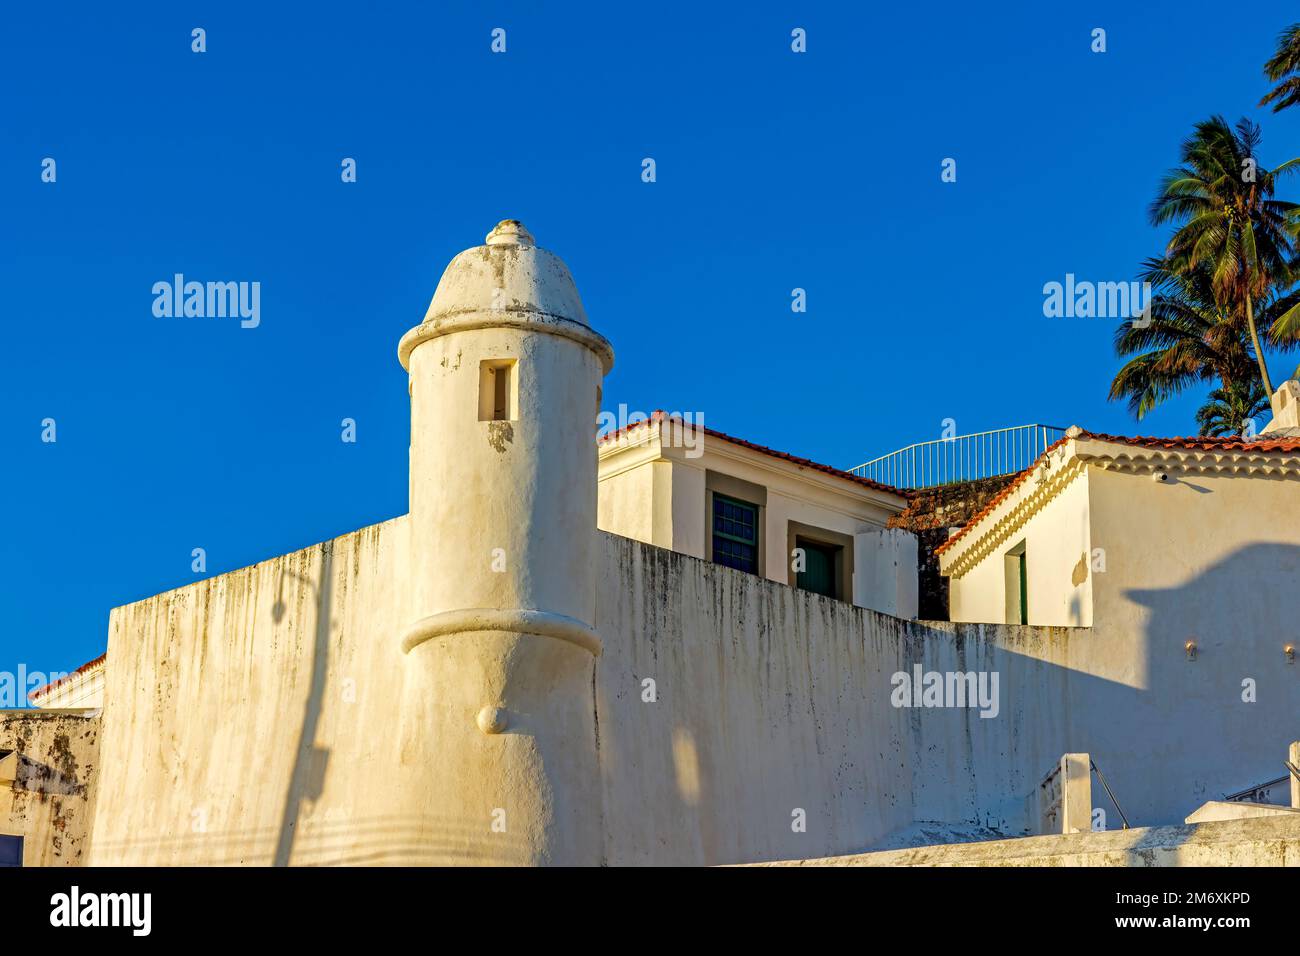 Walls and guardhouse of an old colonial fortification Stock Photo